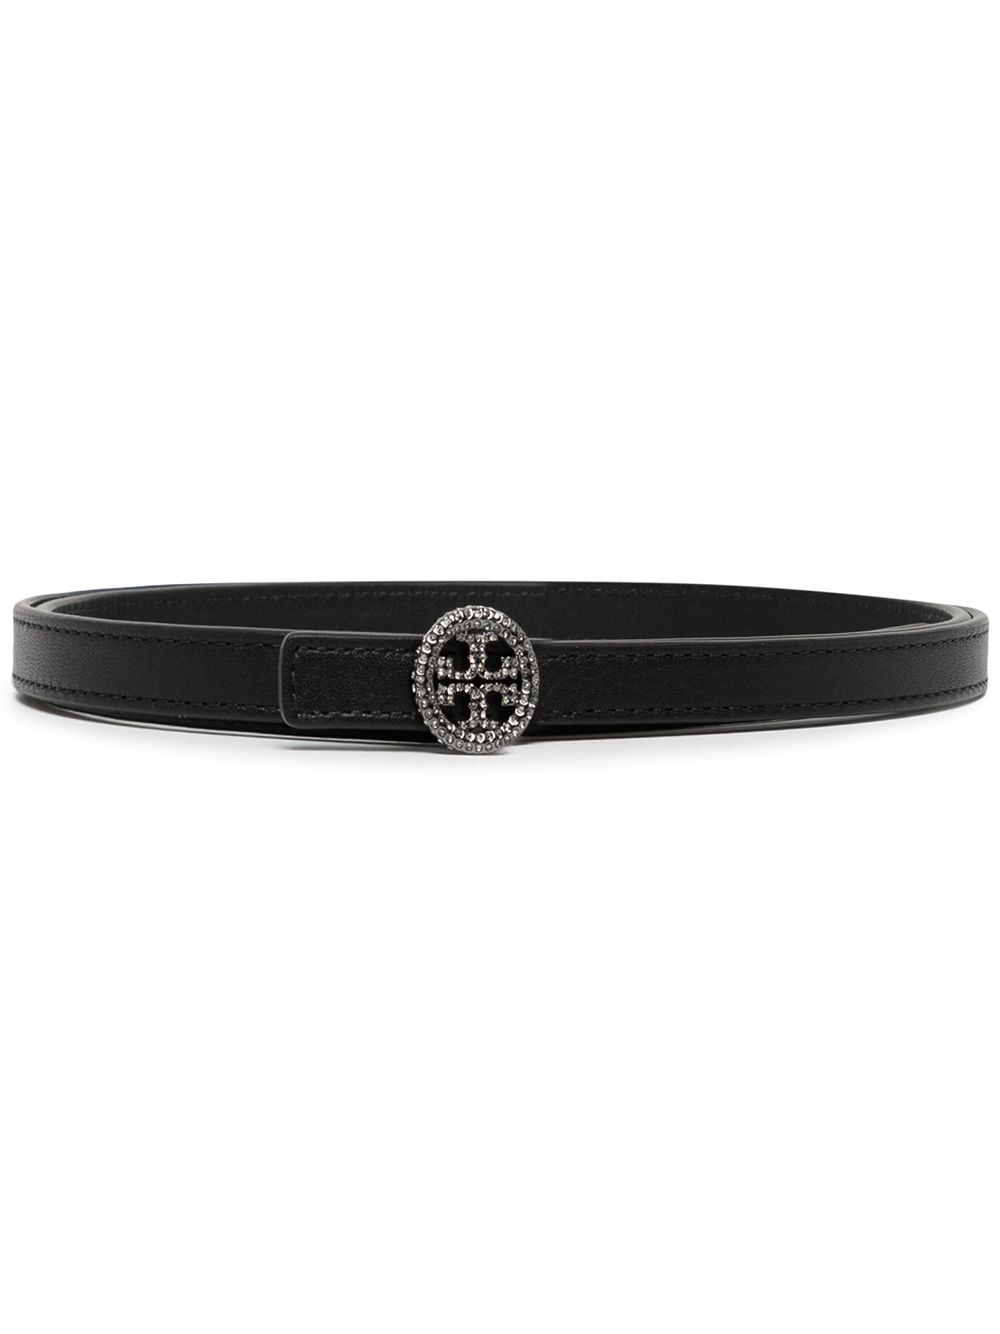 Shop Tory Burch logo-plaque leather belt with Express Delivery - FARFETCH